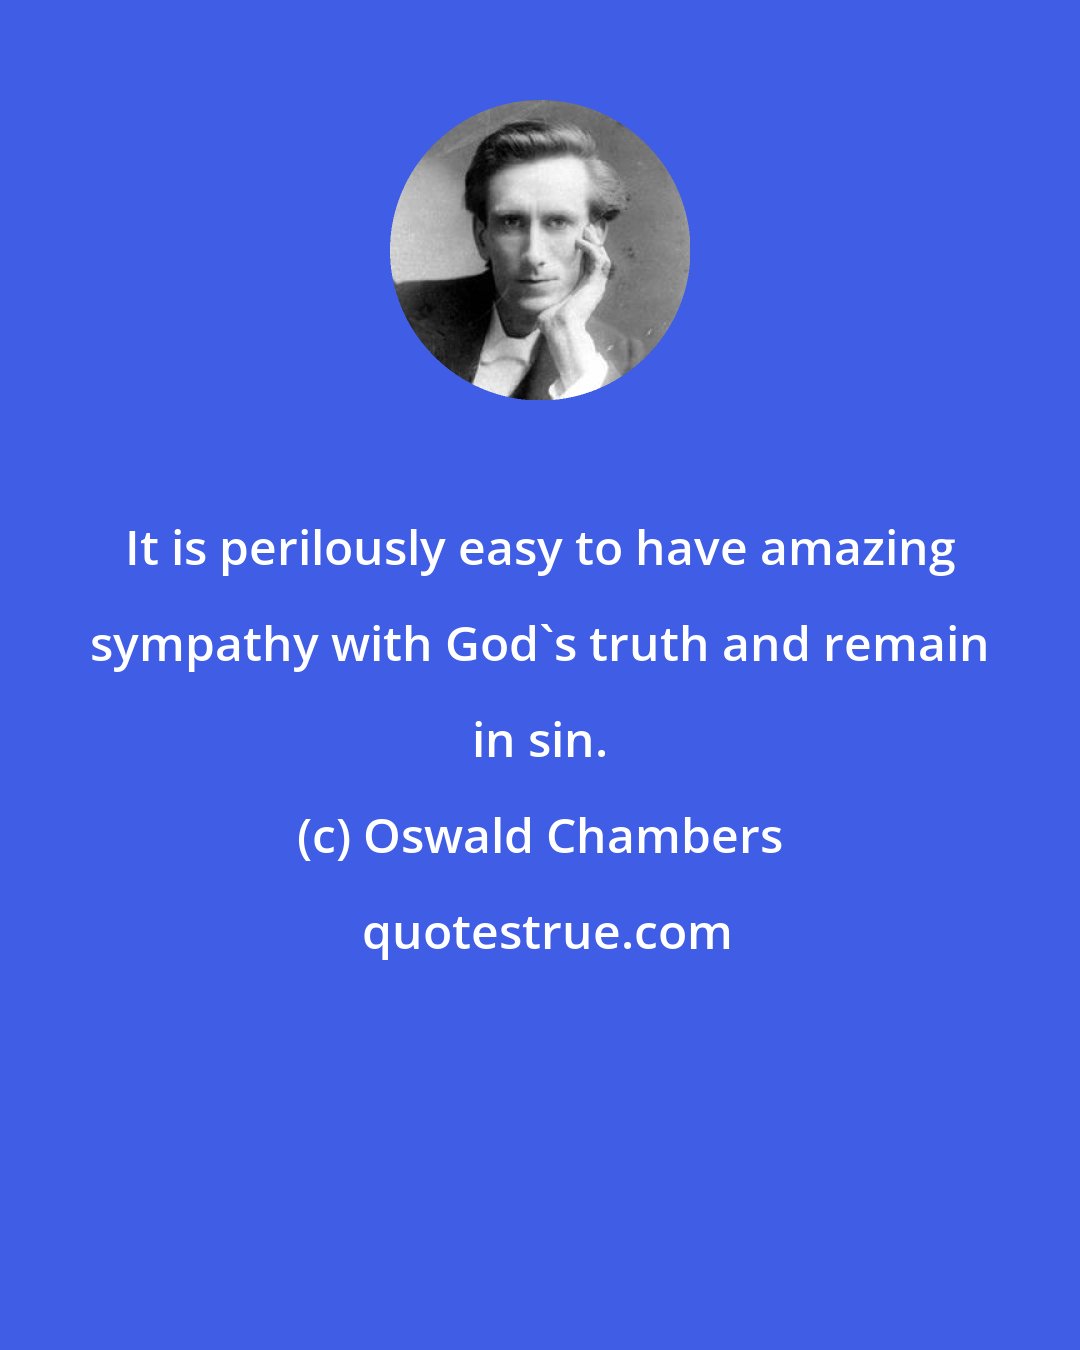 Oswald Chambers: It is perilously easy to have amazing sympathy with God's truth and remain in sin.